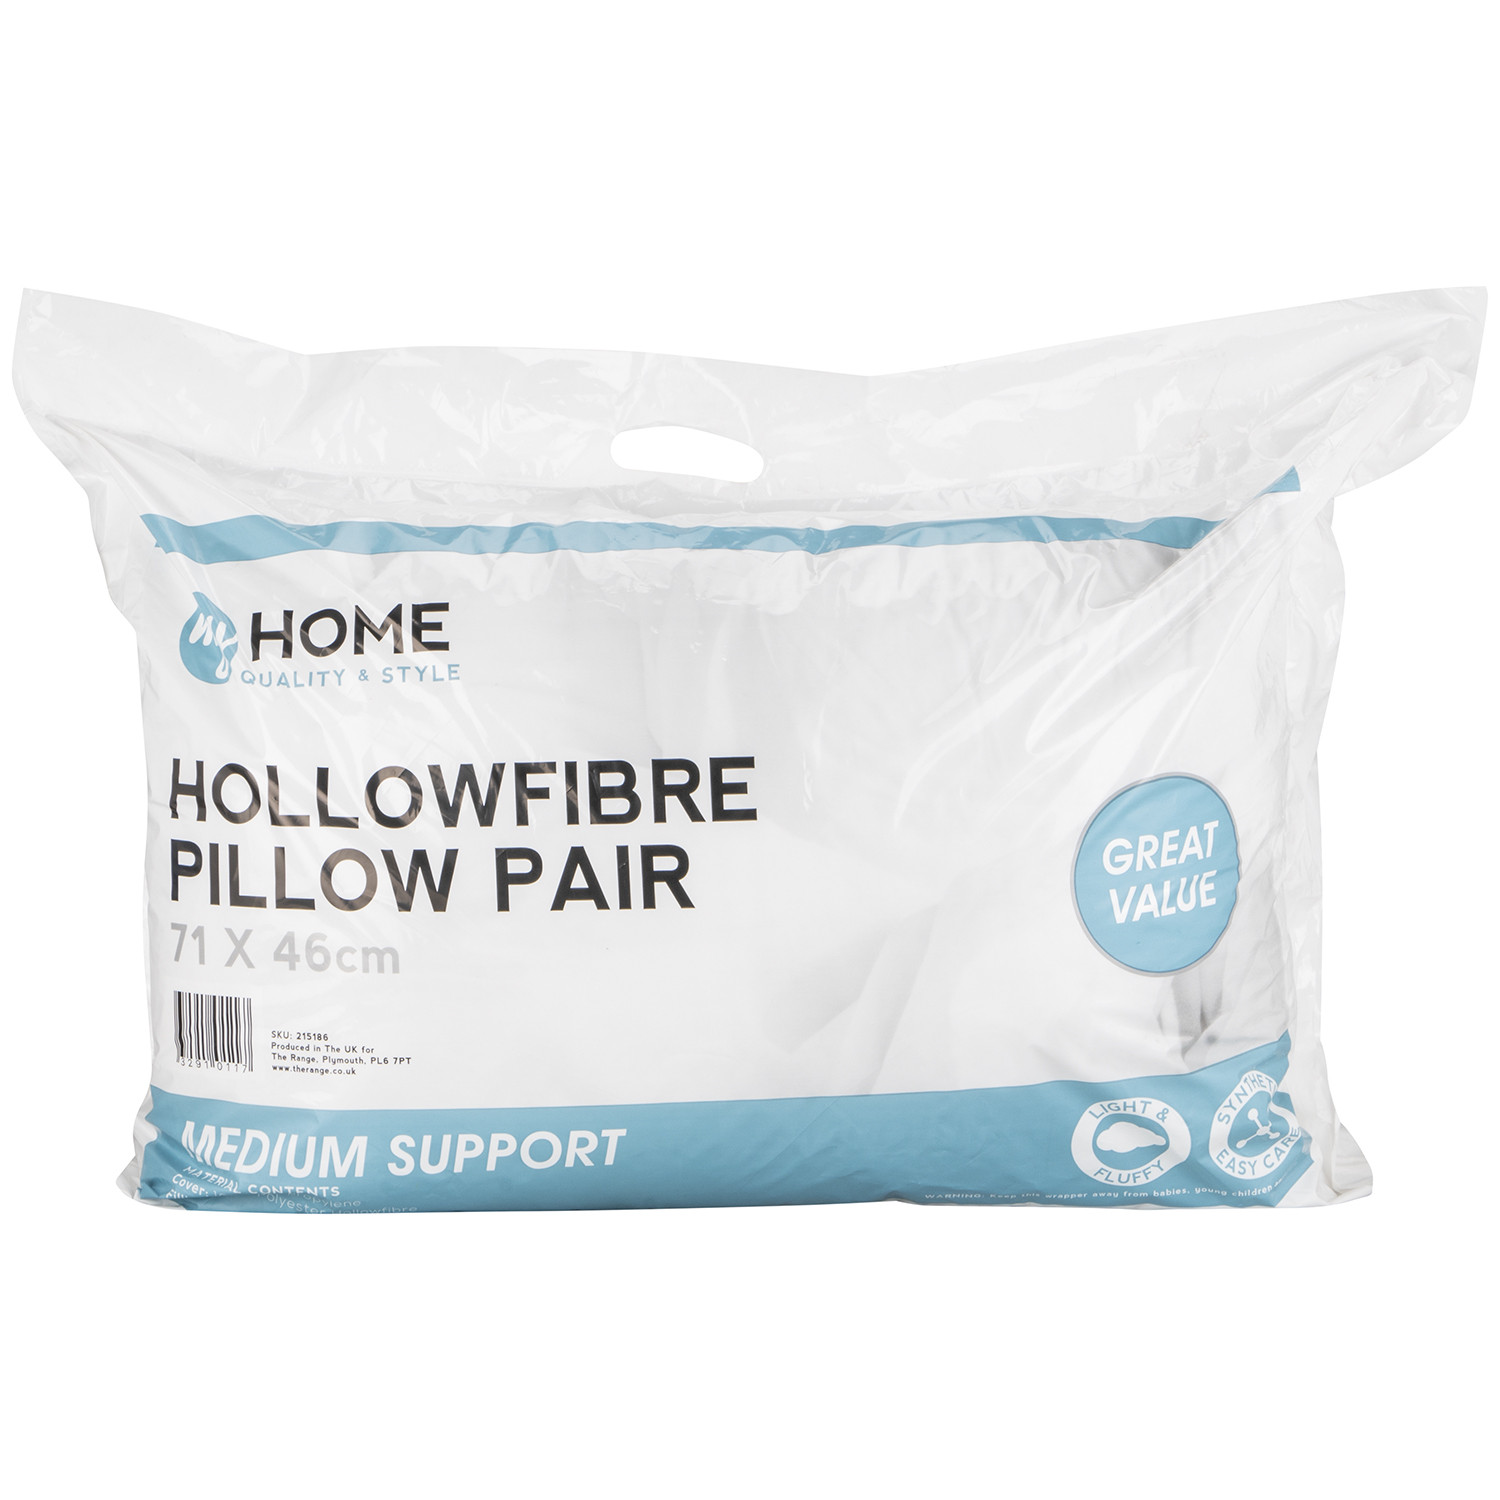 My Home Hollowfibre Pillows 2 Pack Image